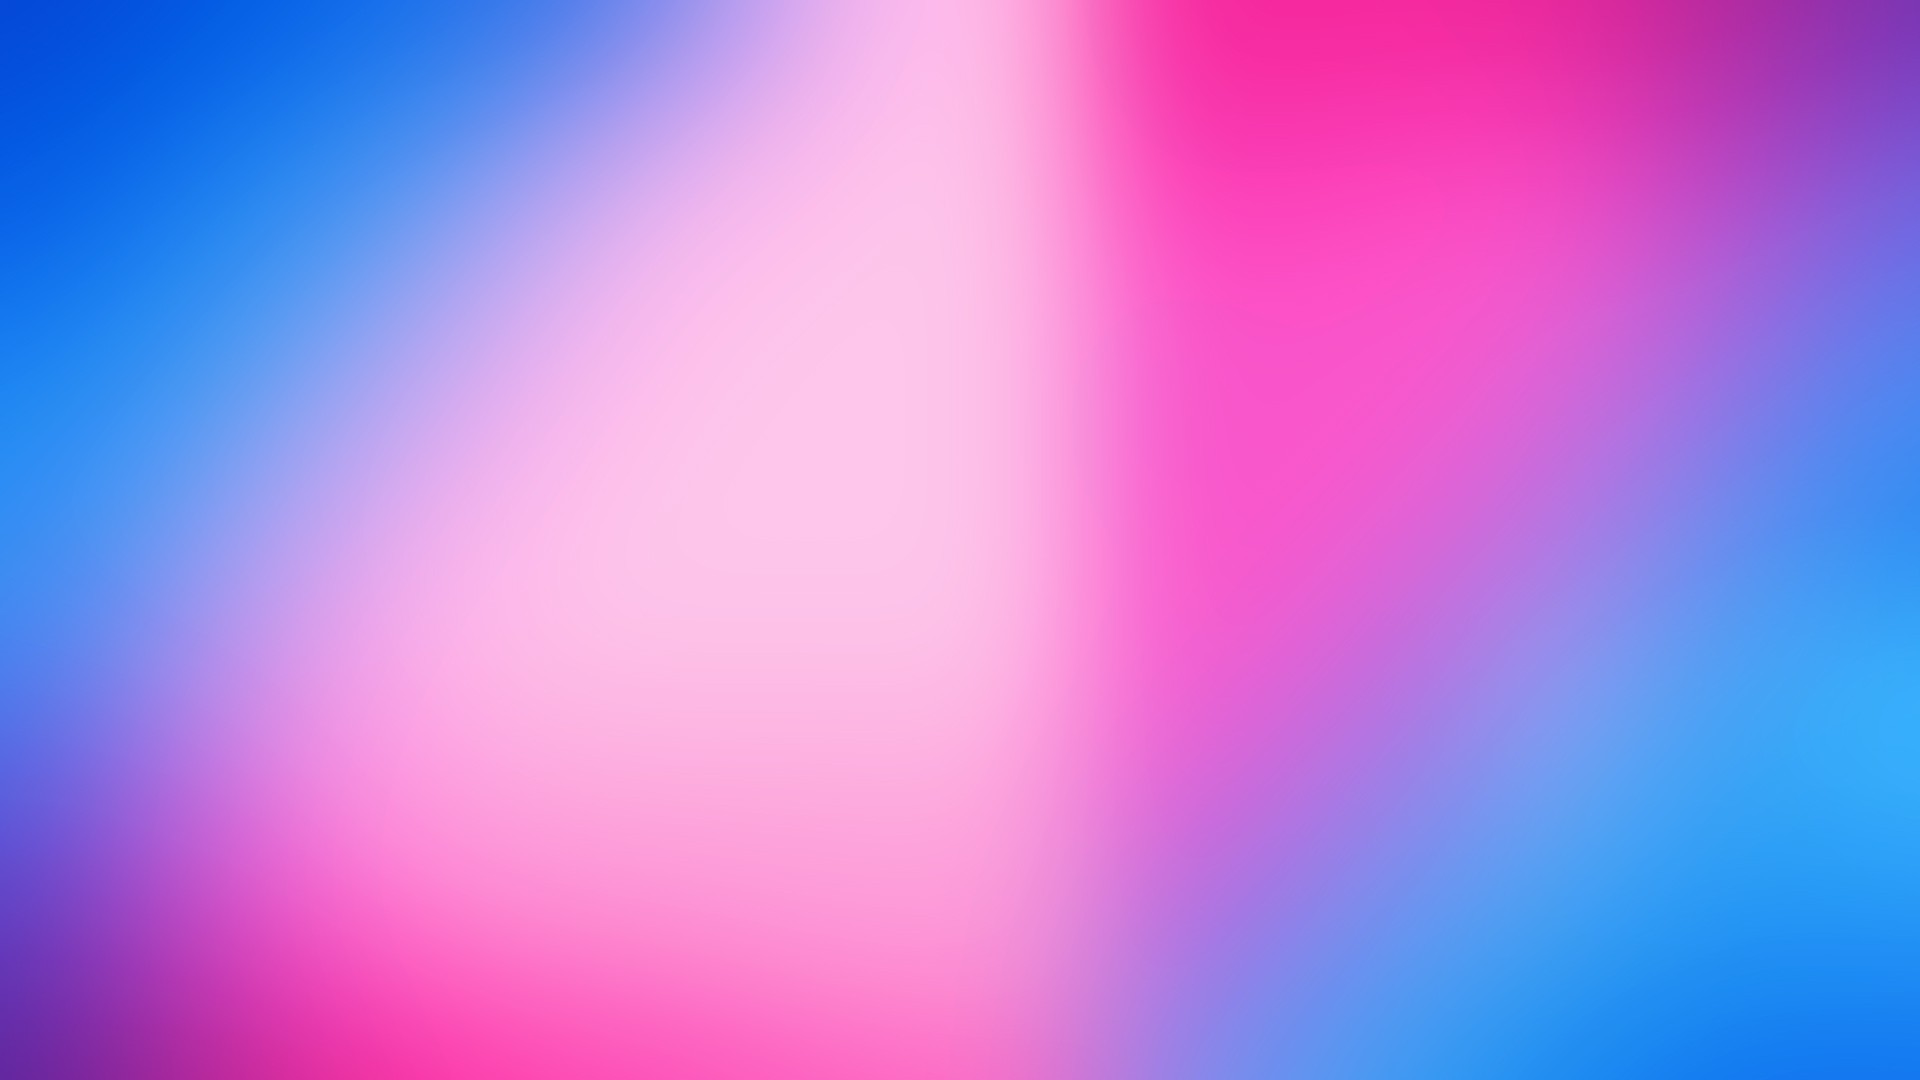 General 1920x1080 gradient pink blurred blue simple background minimalism abstract texture